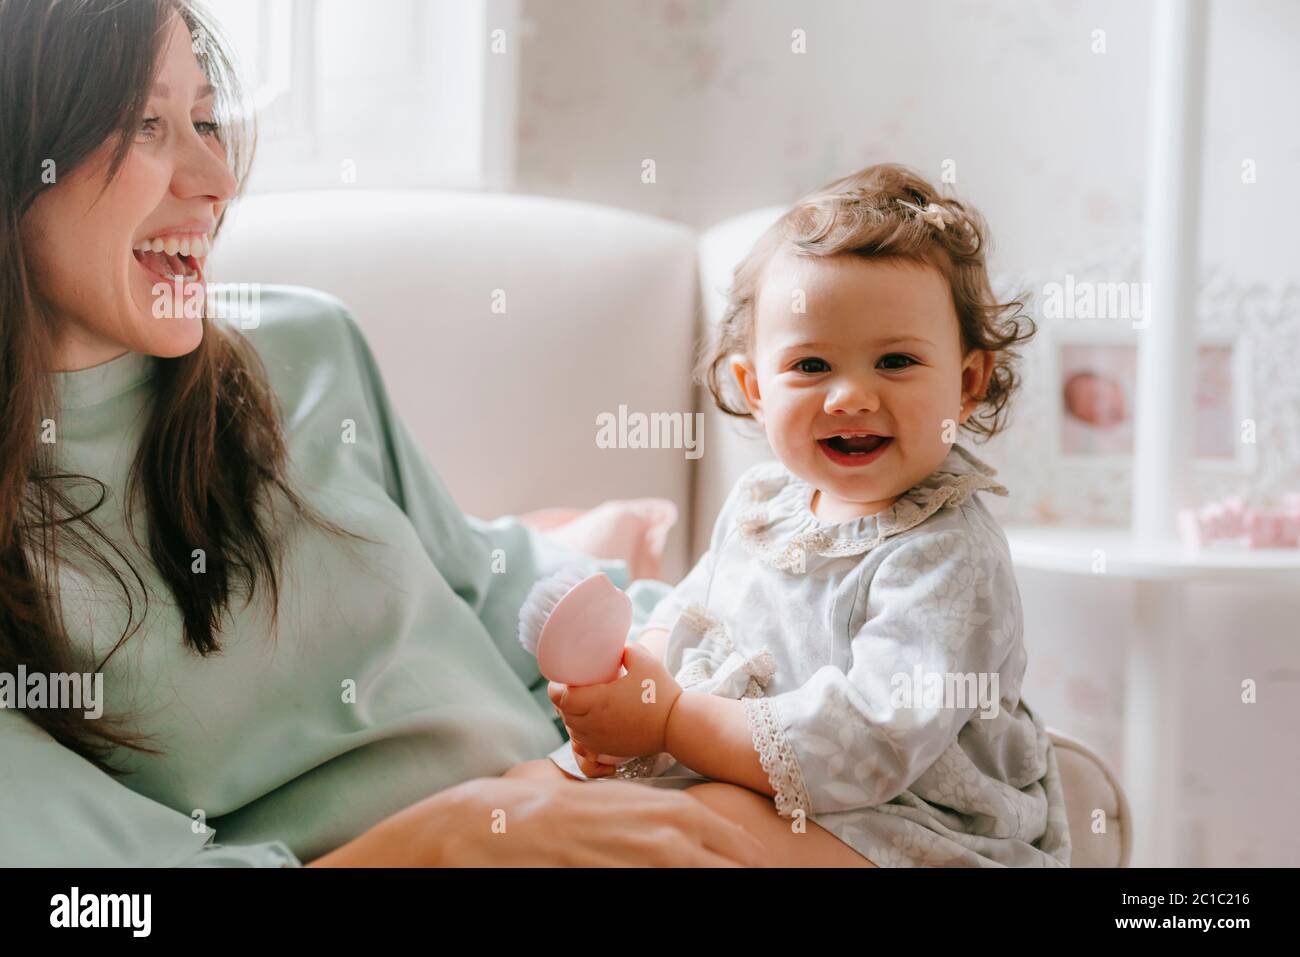 little girl having fun sitting on her pregnant mother in the room Stock Photo